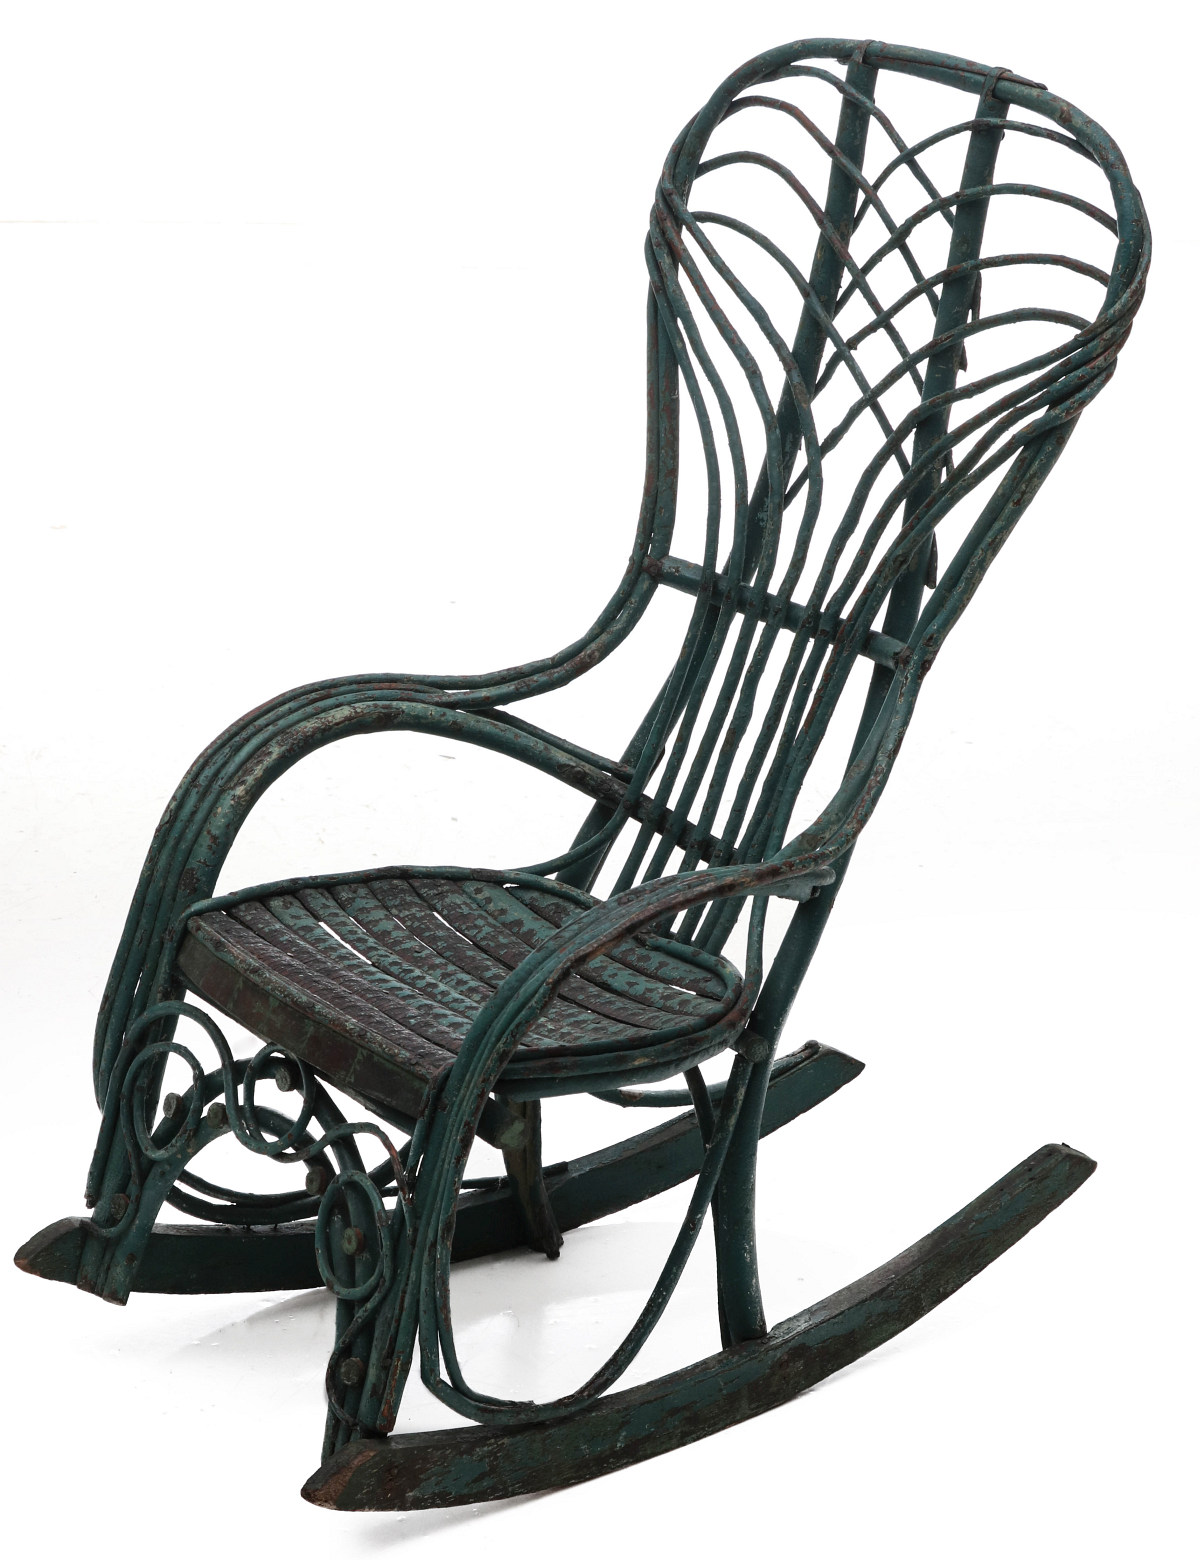 AN INTRICATE CHILD'S TWIG ROCKER IN GREEN WITH ORNAMENT